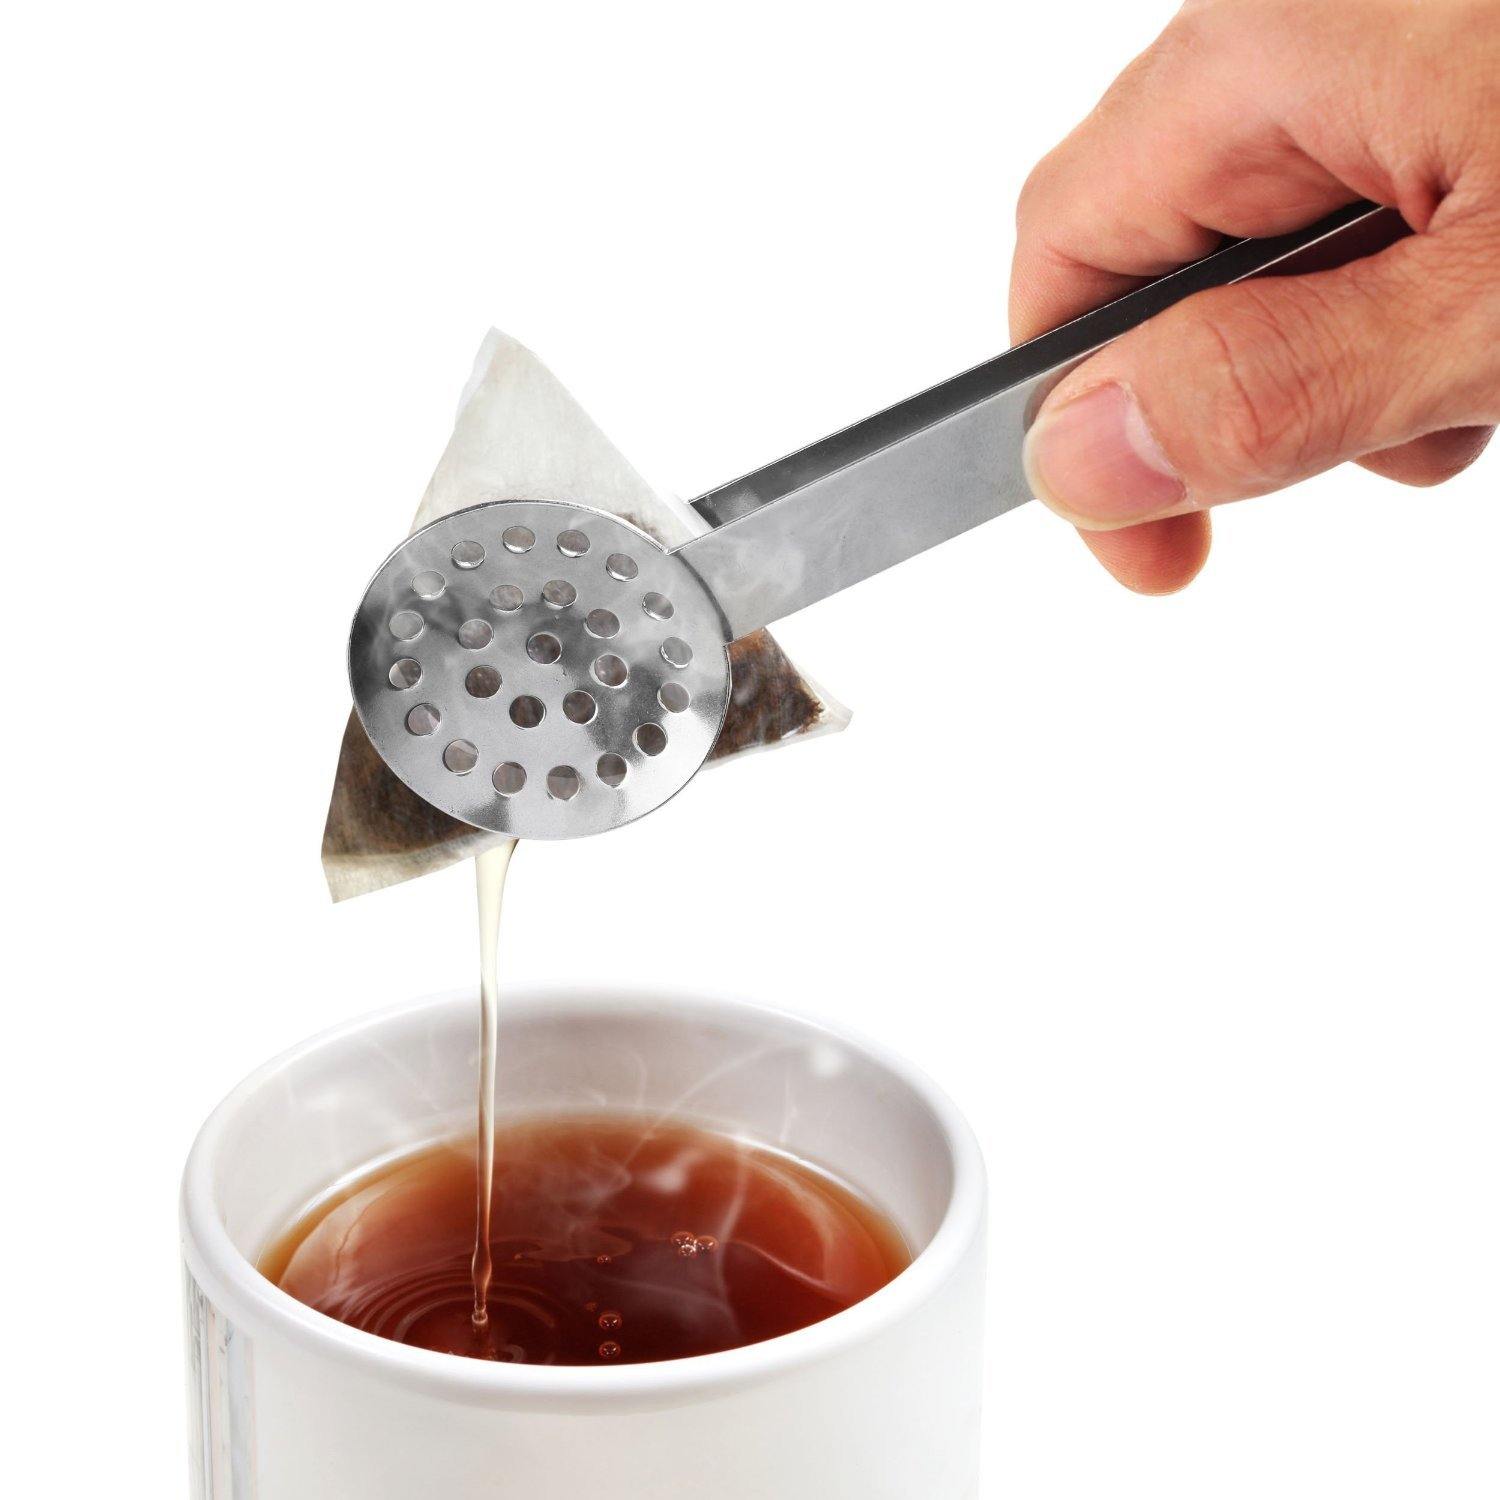 Tea Bag Squeezer, Extract Every Drop of Tea Flavour – Orblue